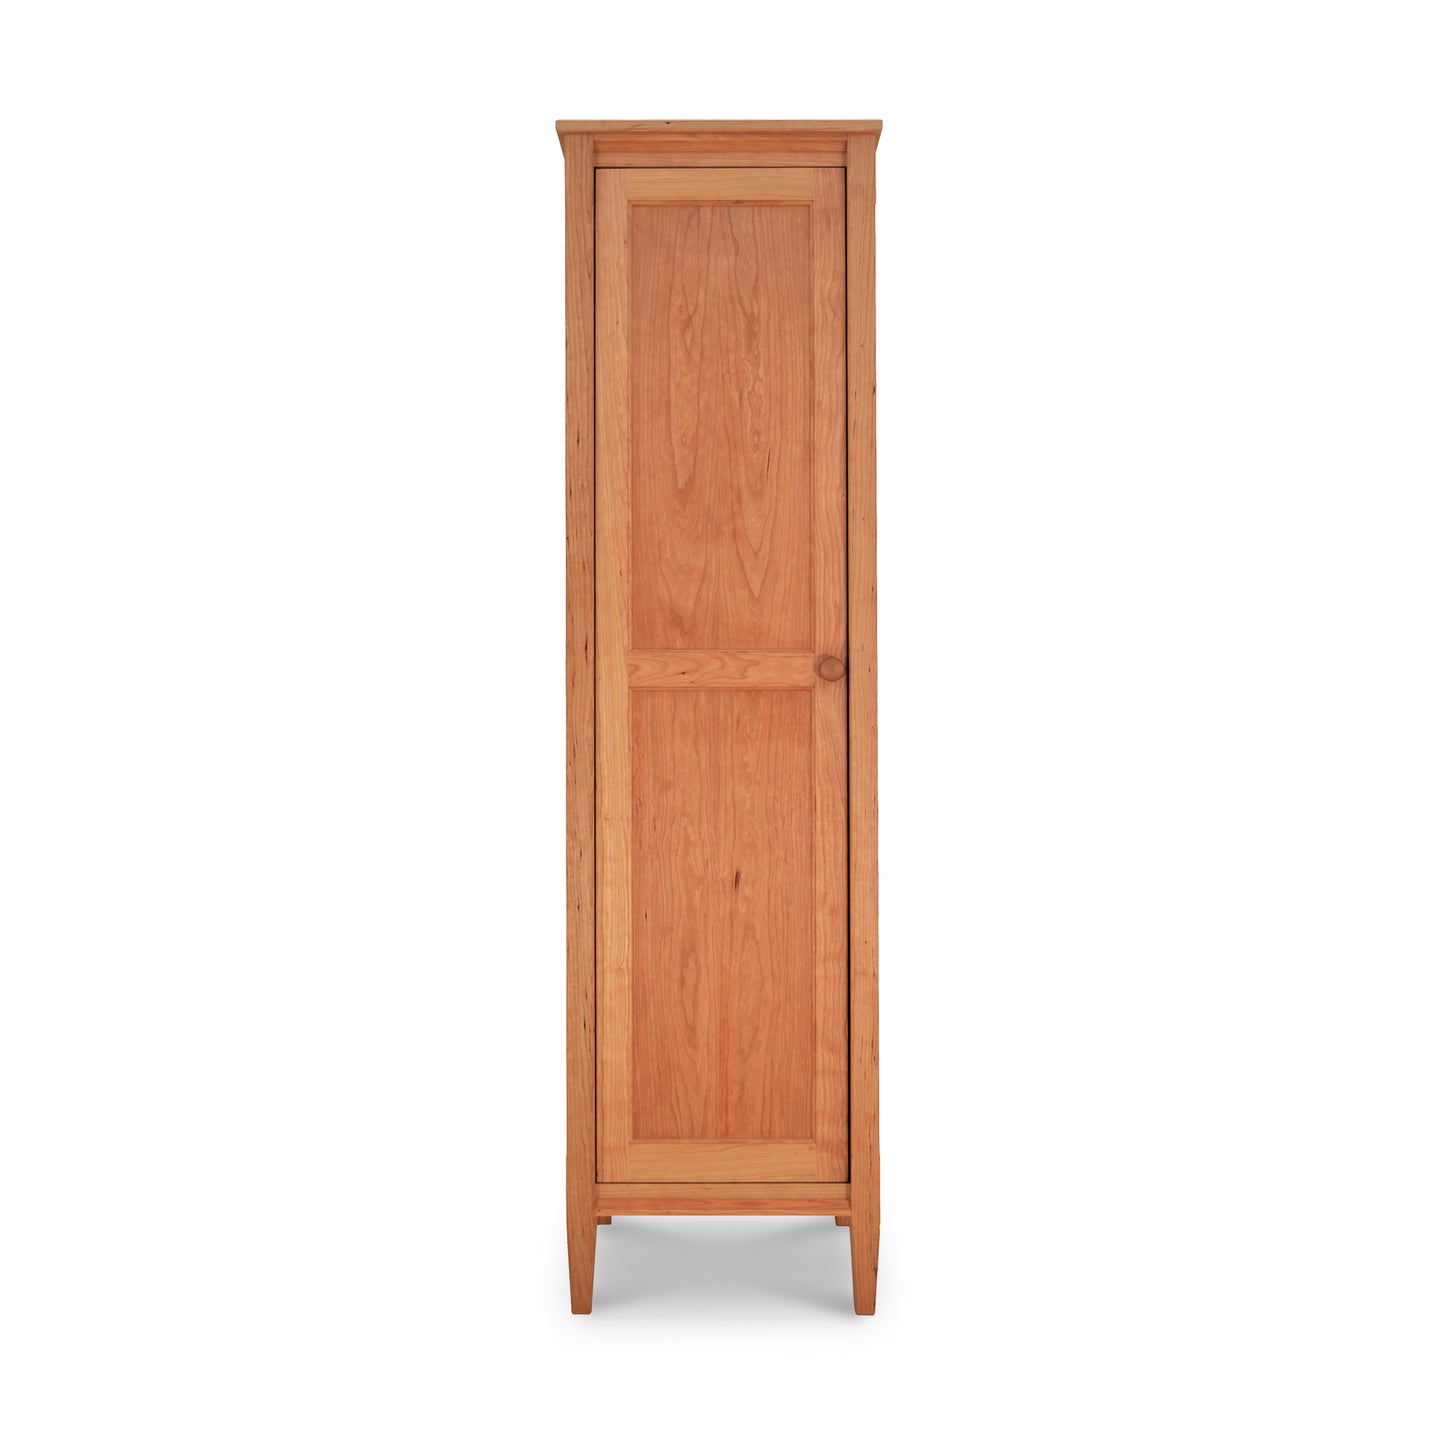 A Vermont Shaker Narrow Bookcase with Mirror by Maple Corner Woodworks, featuring a closed single door, a simple design, and a natural wood finish, isolated on a white background.